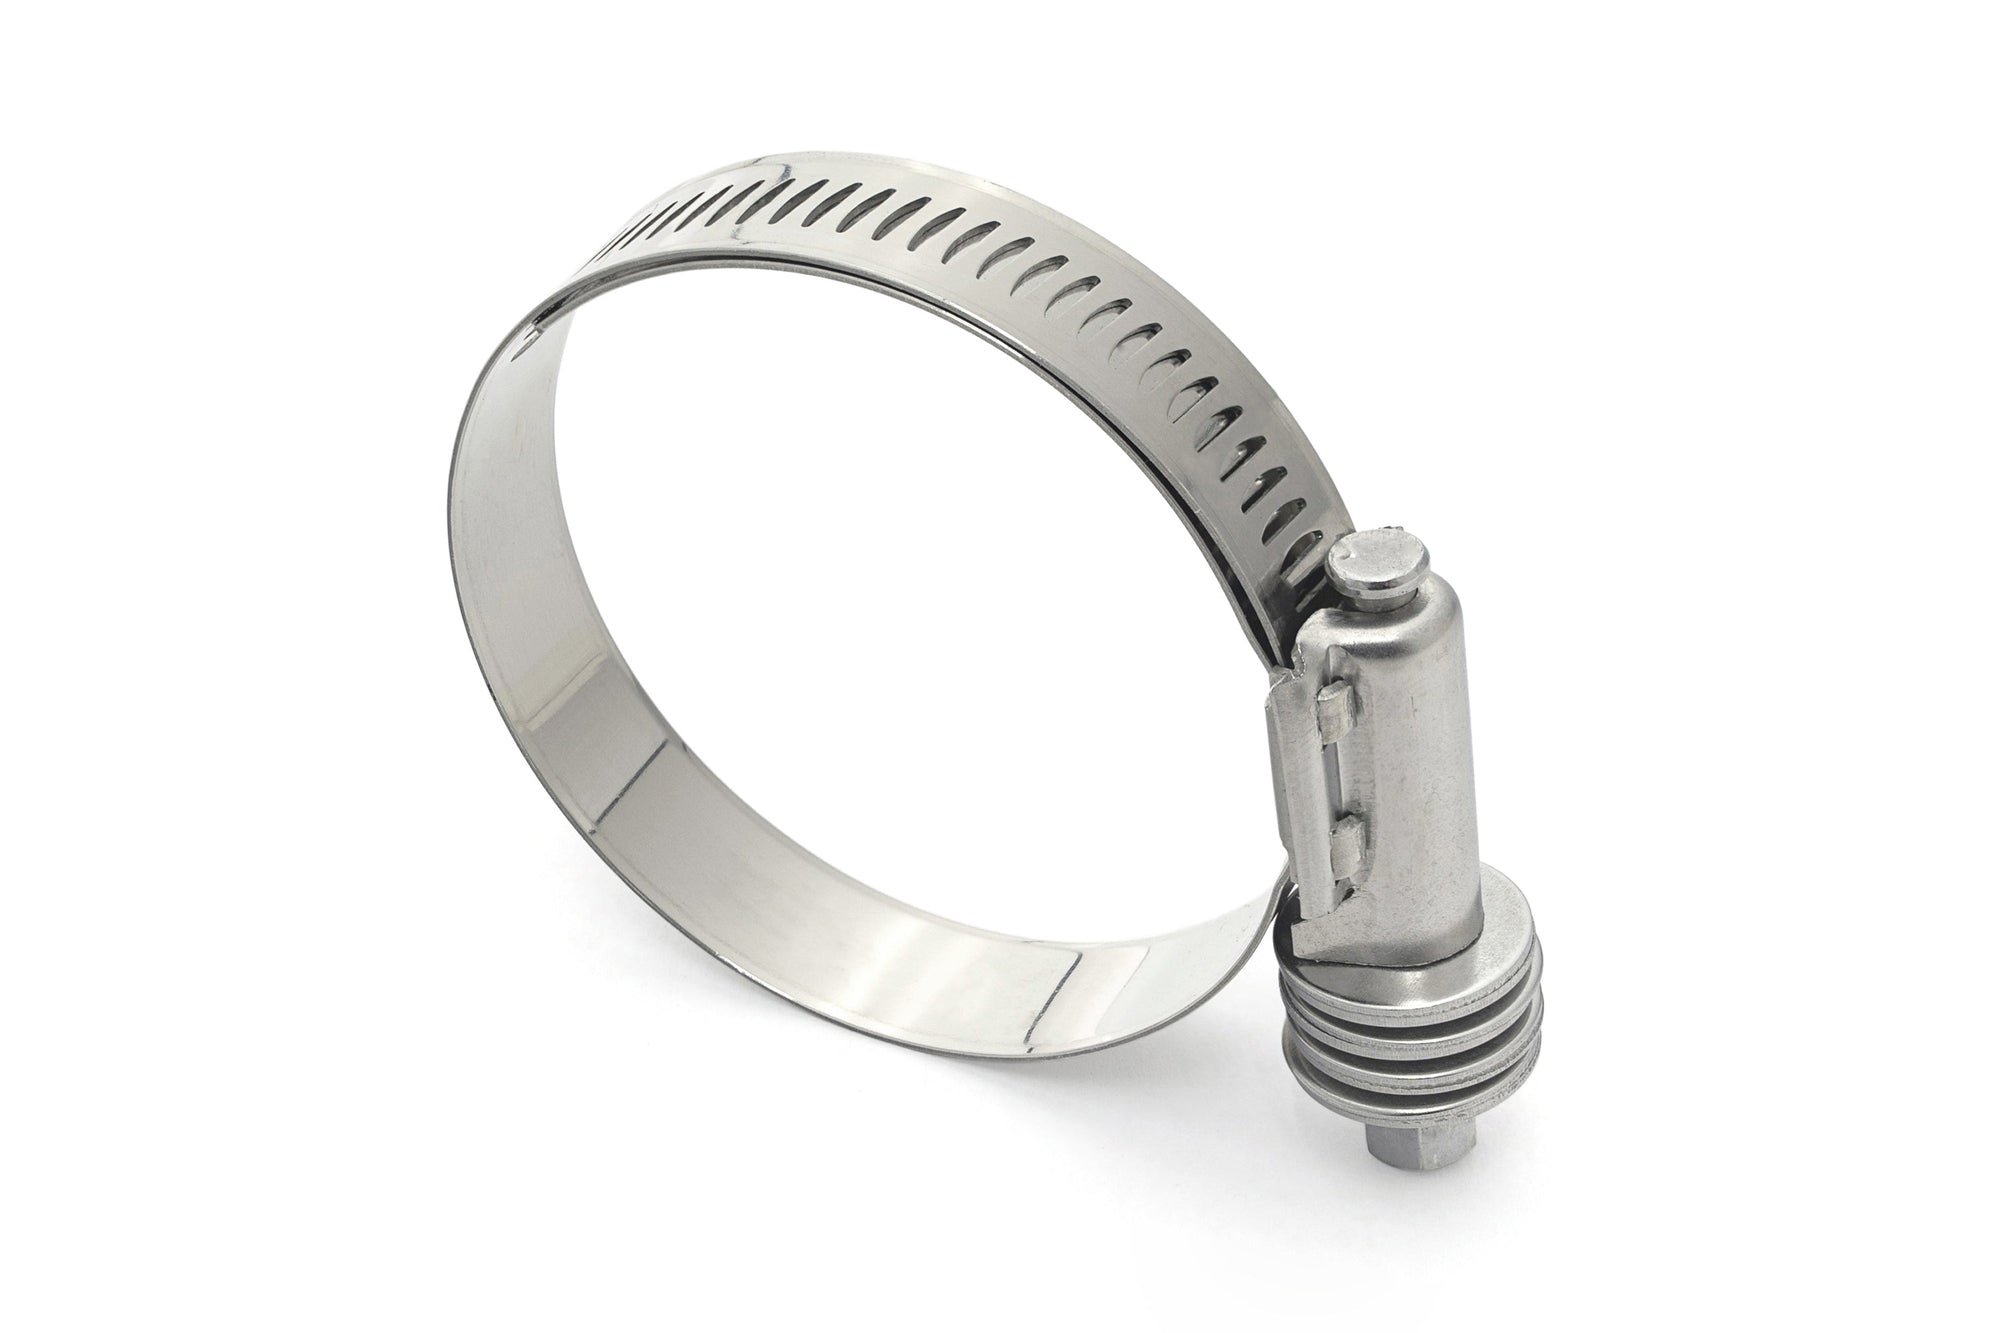 HPS Stainless Steel Heavy Duty Constant Torque Hose Clamp Size # 450 CTHD-450 3-9/16 - 4.5 inch 90mm - 114mm